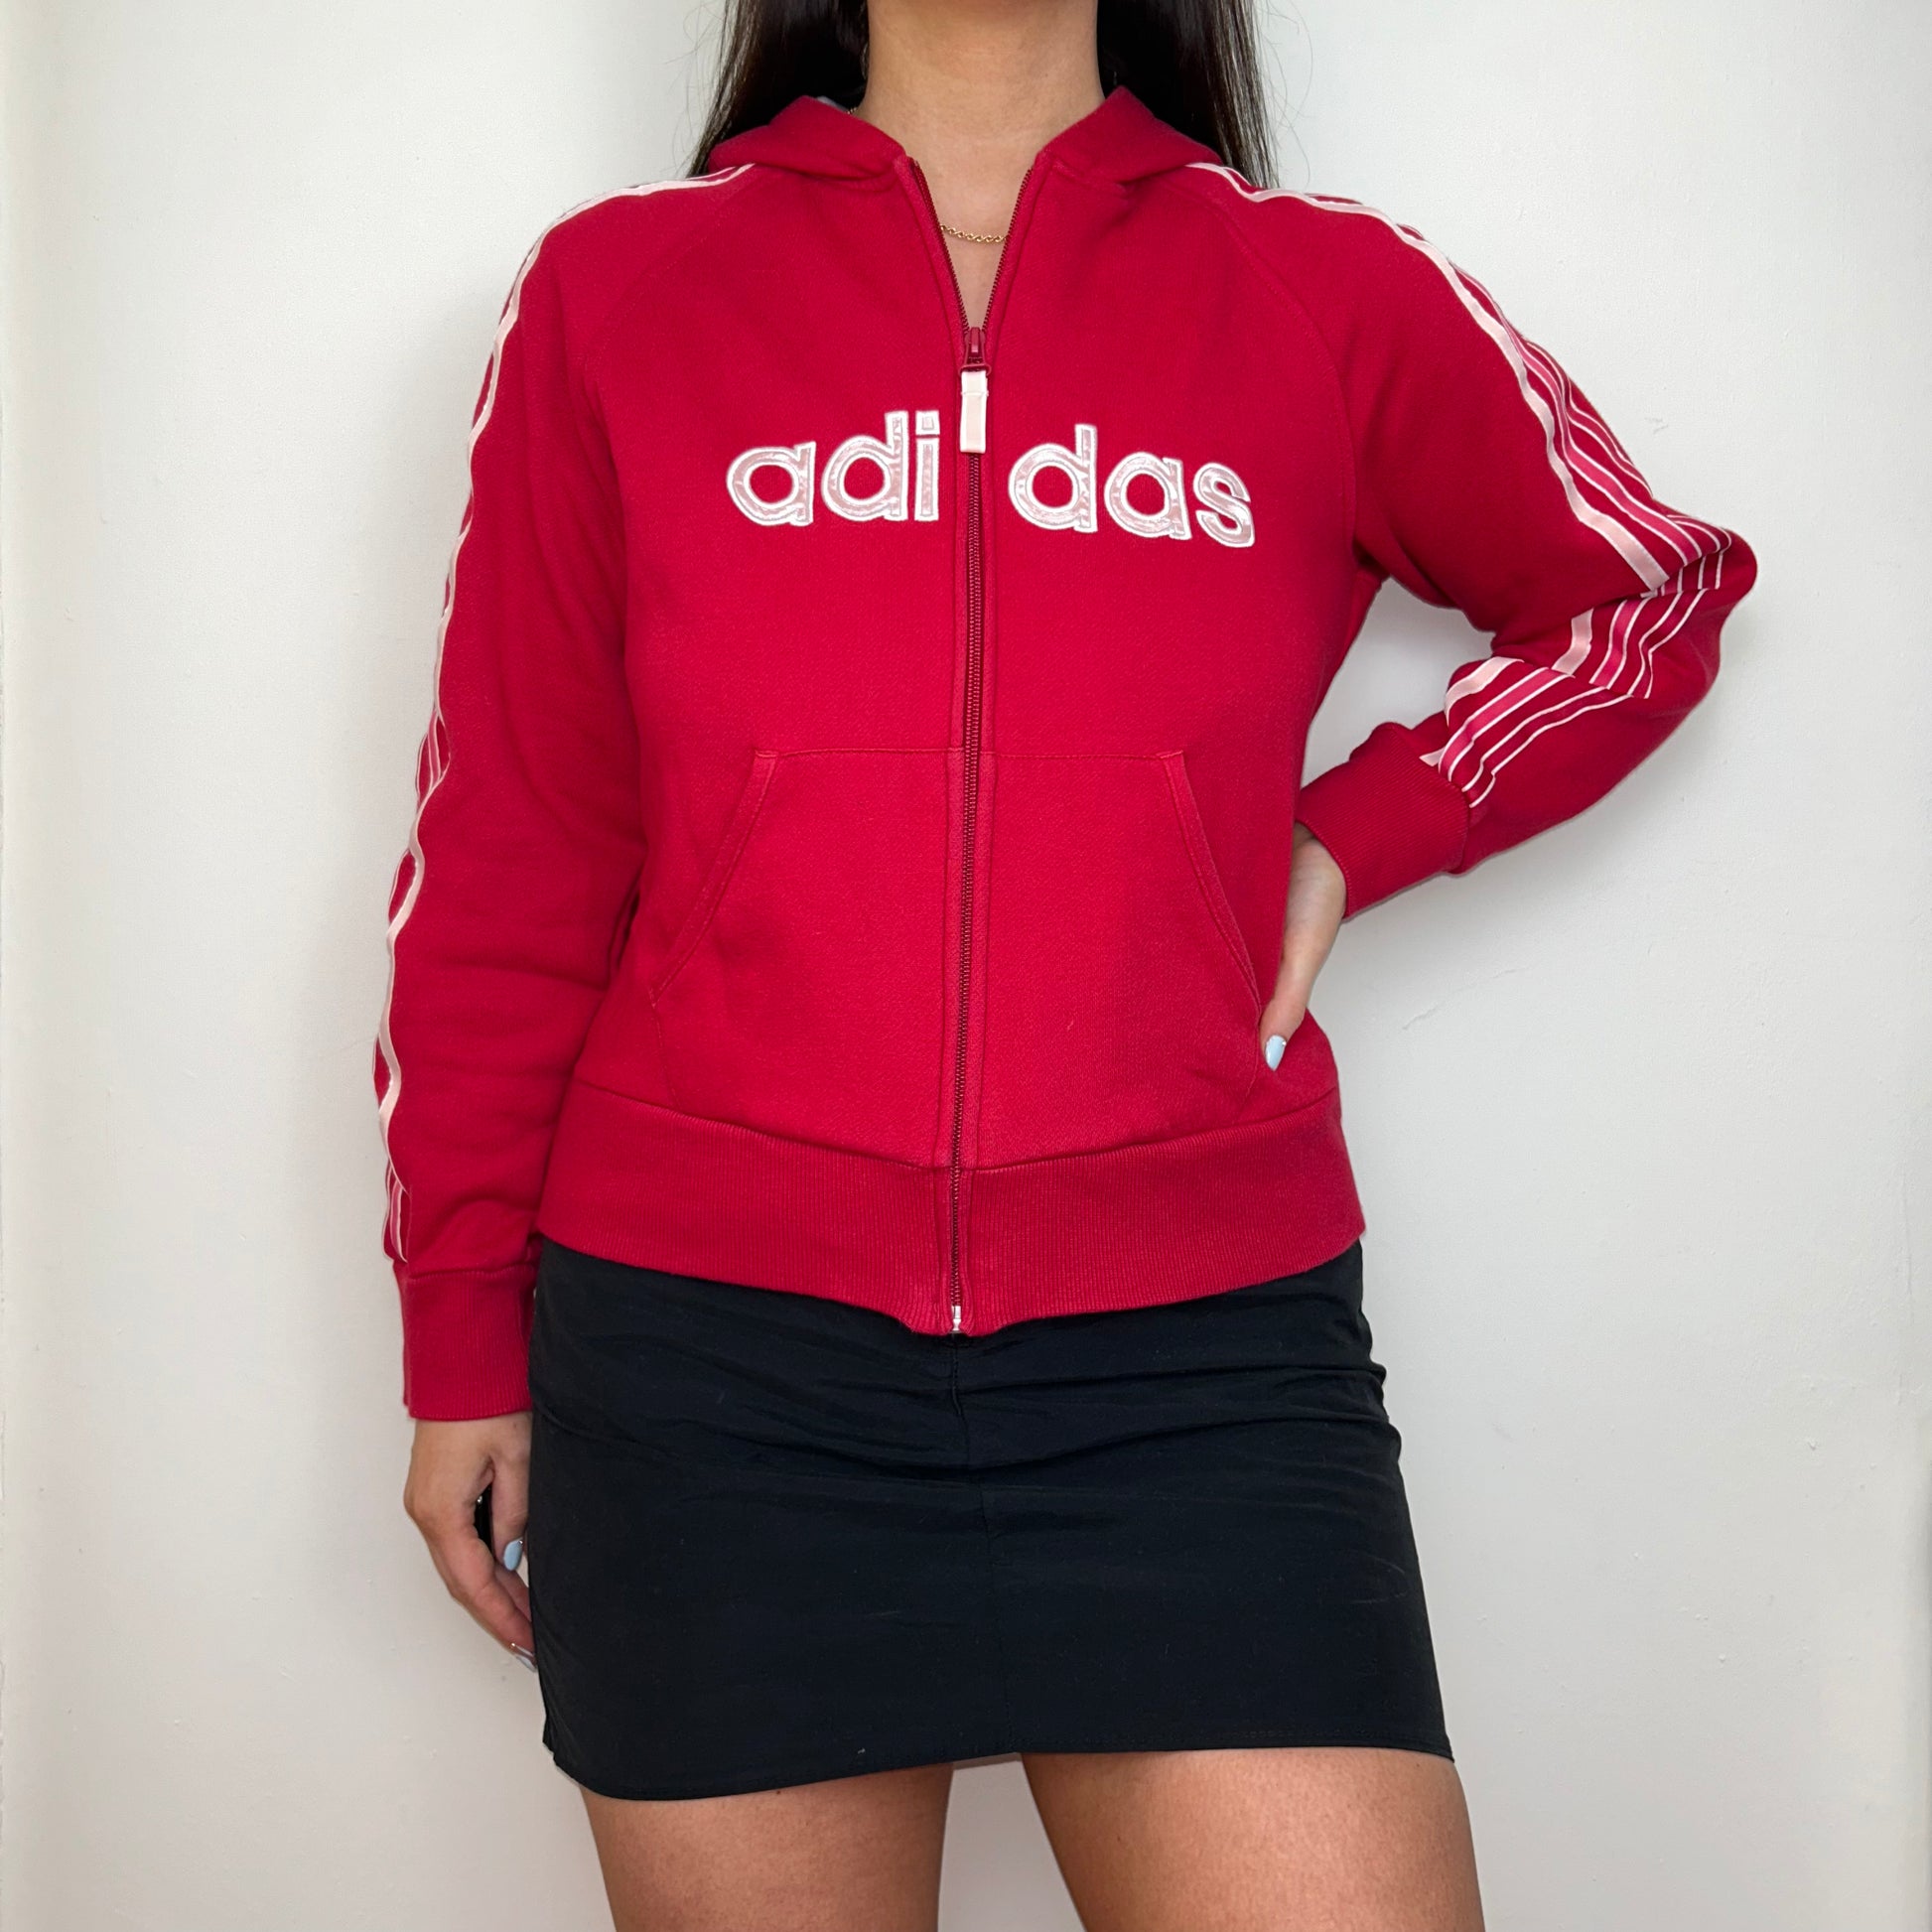 red zip up hoodie with big adidas text logo shown on a model wearing a black mini skirt